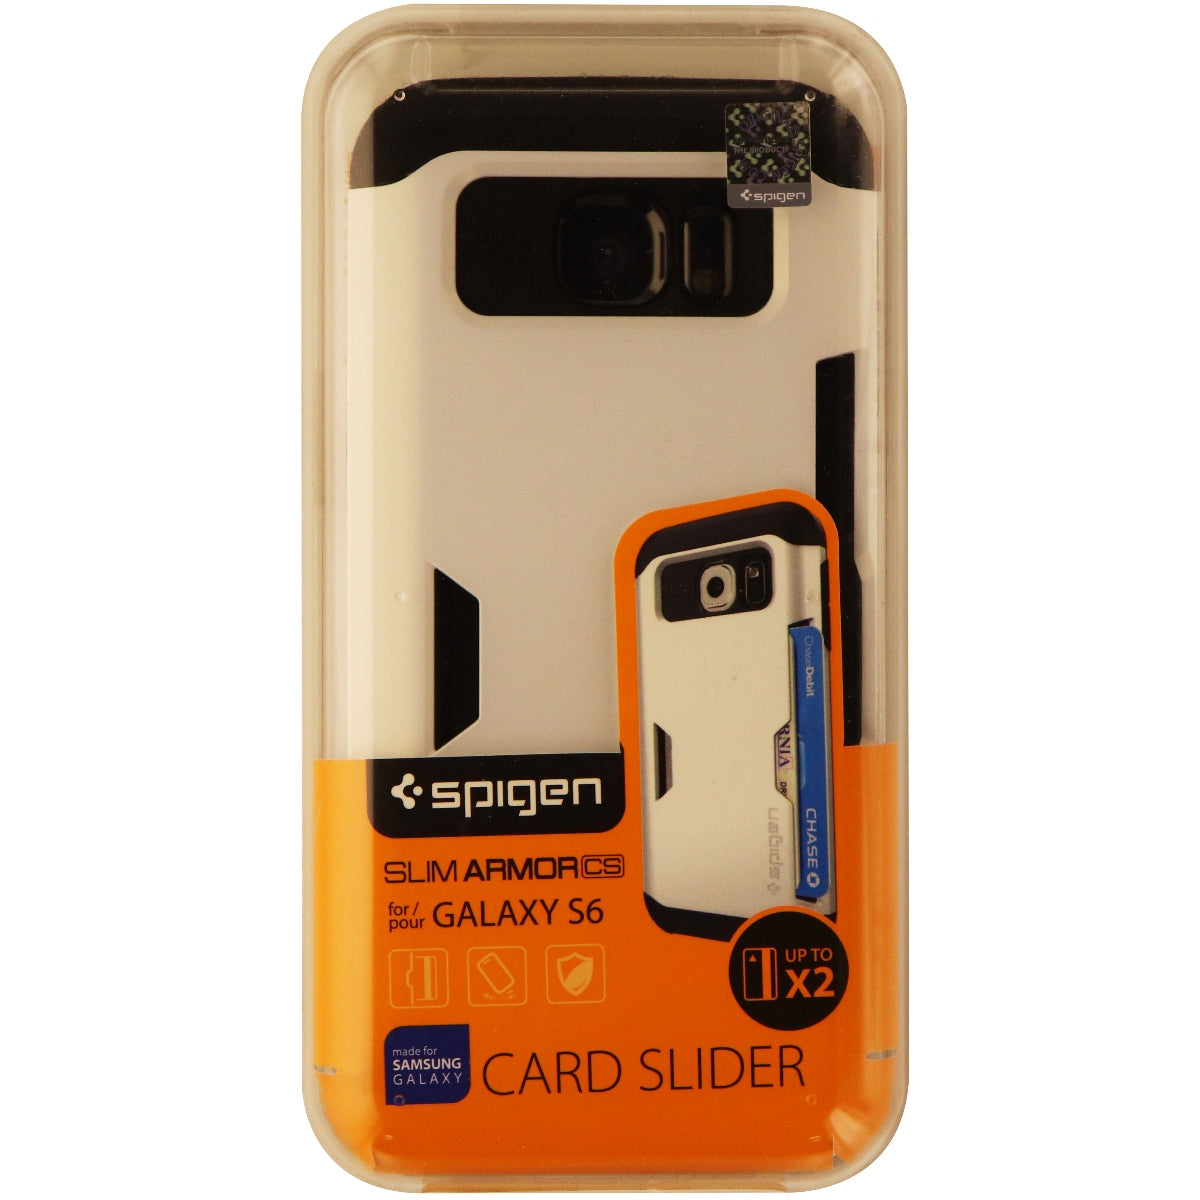 Spigen Slim Armor CS Series Dual Layer Hard Case for Galaxy S6 - White/Black Cell Phone - Cases, Covers & Skins Spigen    - Simple Cell Bulk Wholesale Pricing - USA Seller